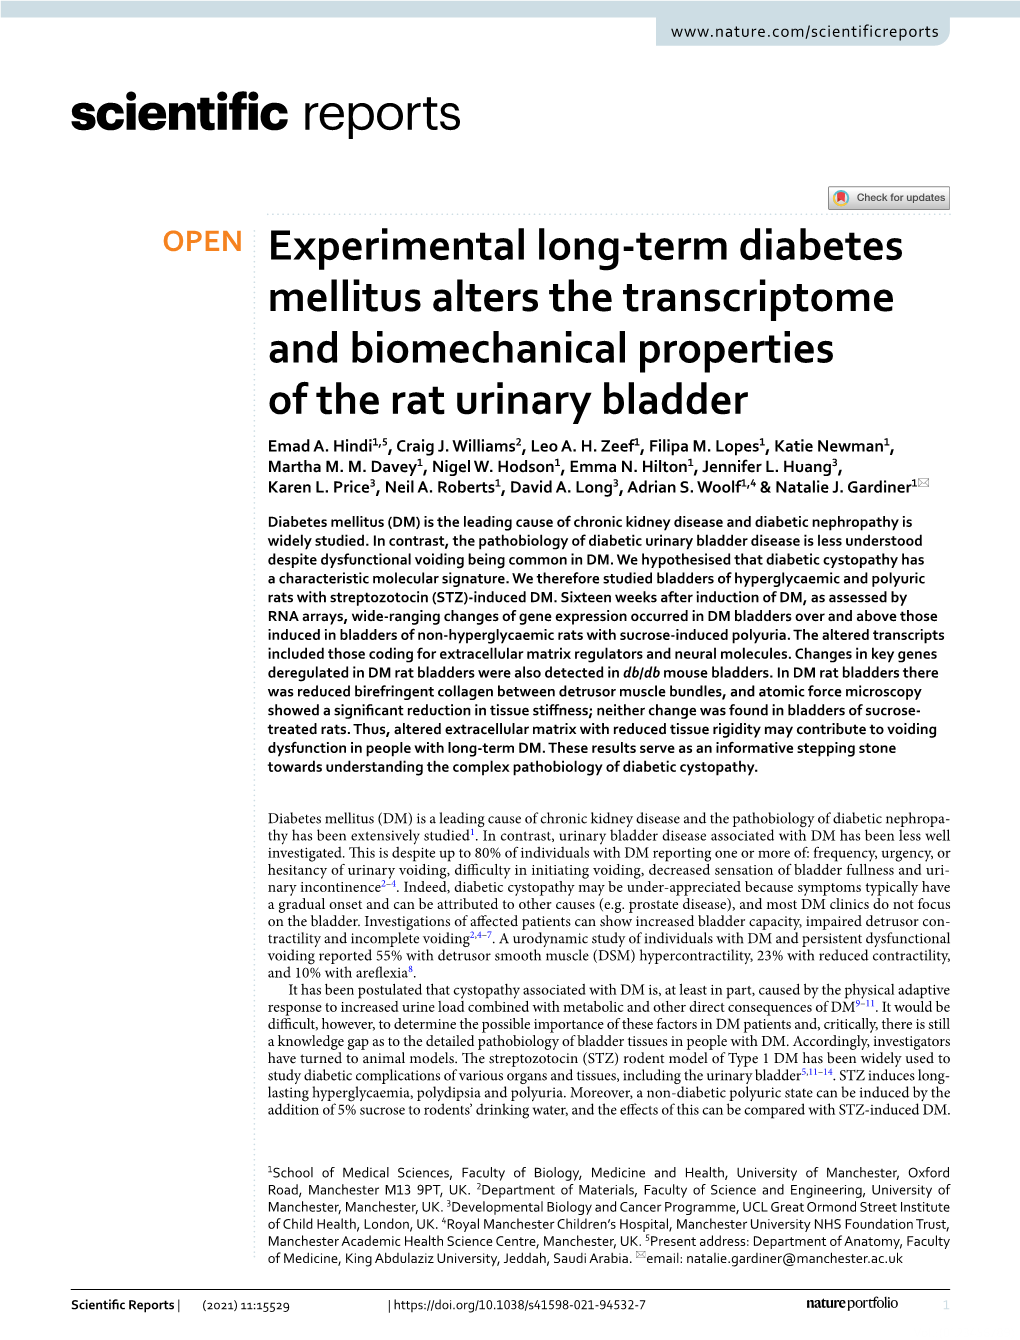 Experimental Long-Term Diabetes Mellitus Alters the Transcriptome and Biomechanical Properties of the Rat Urinary Bladder